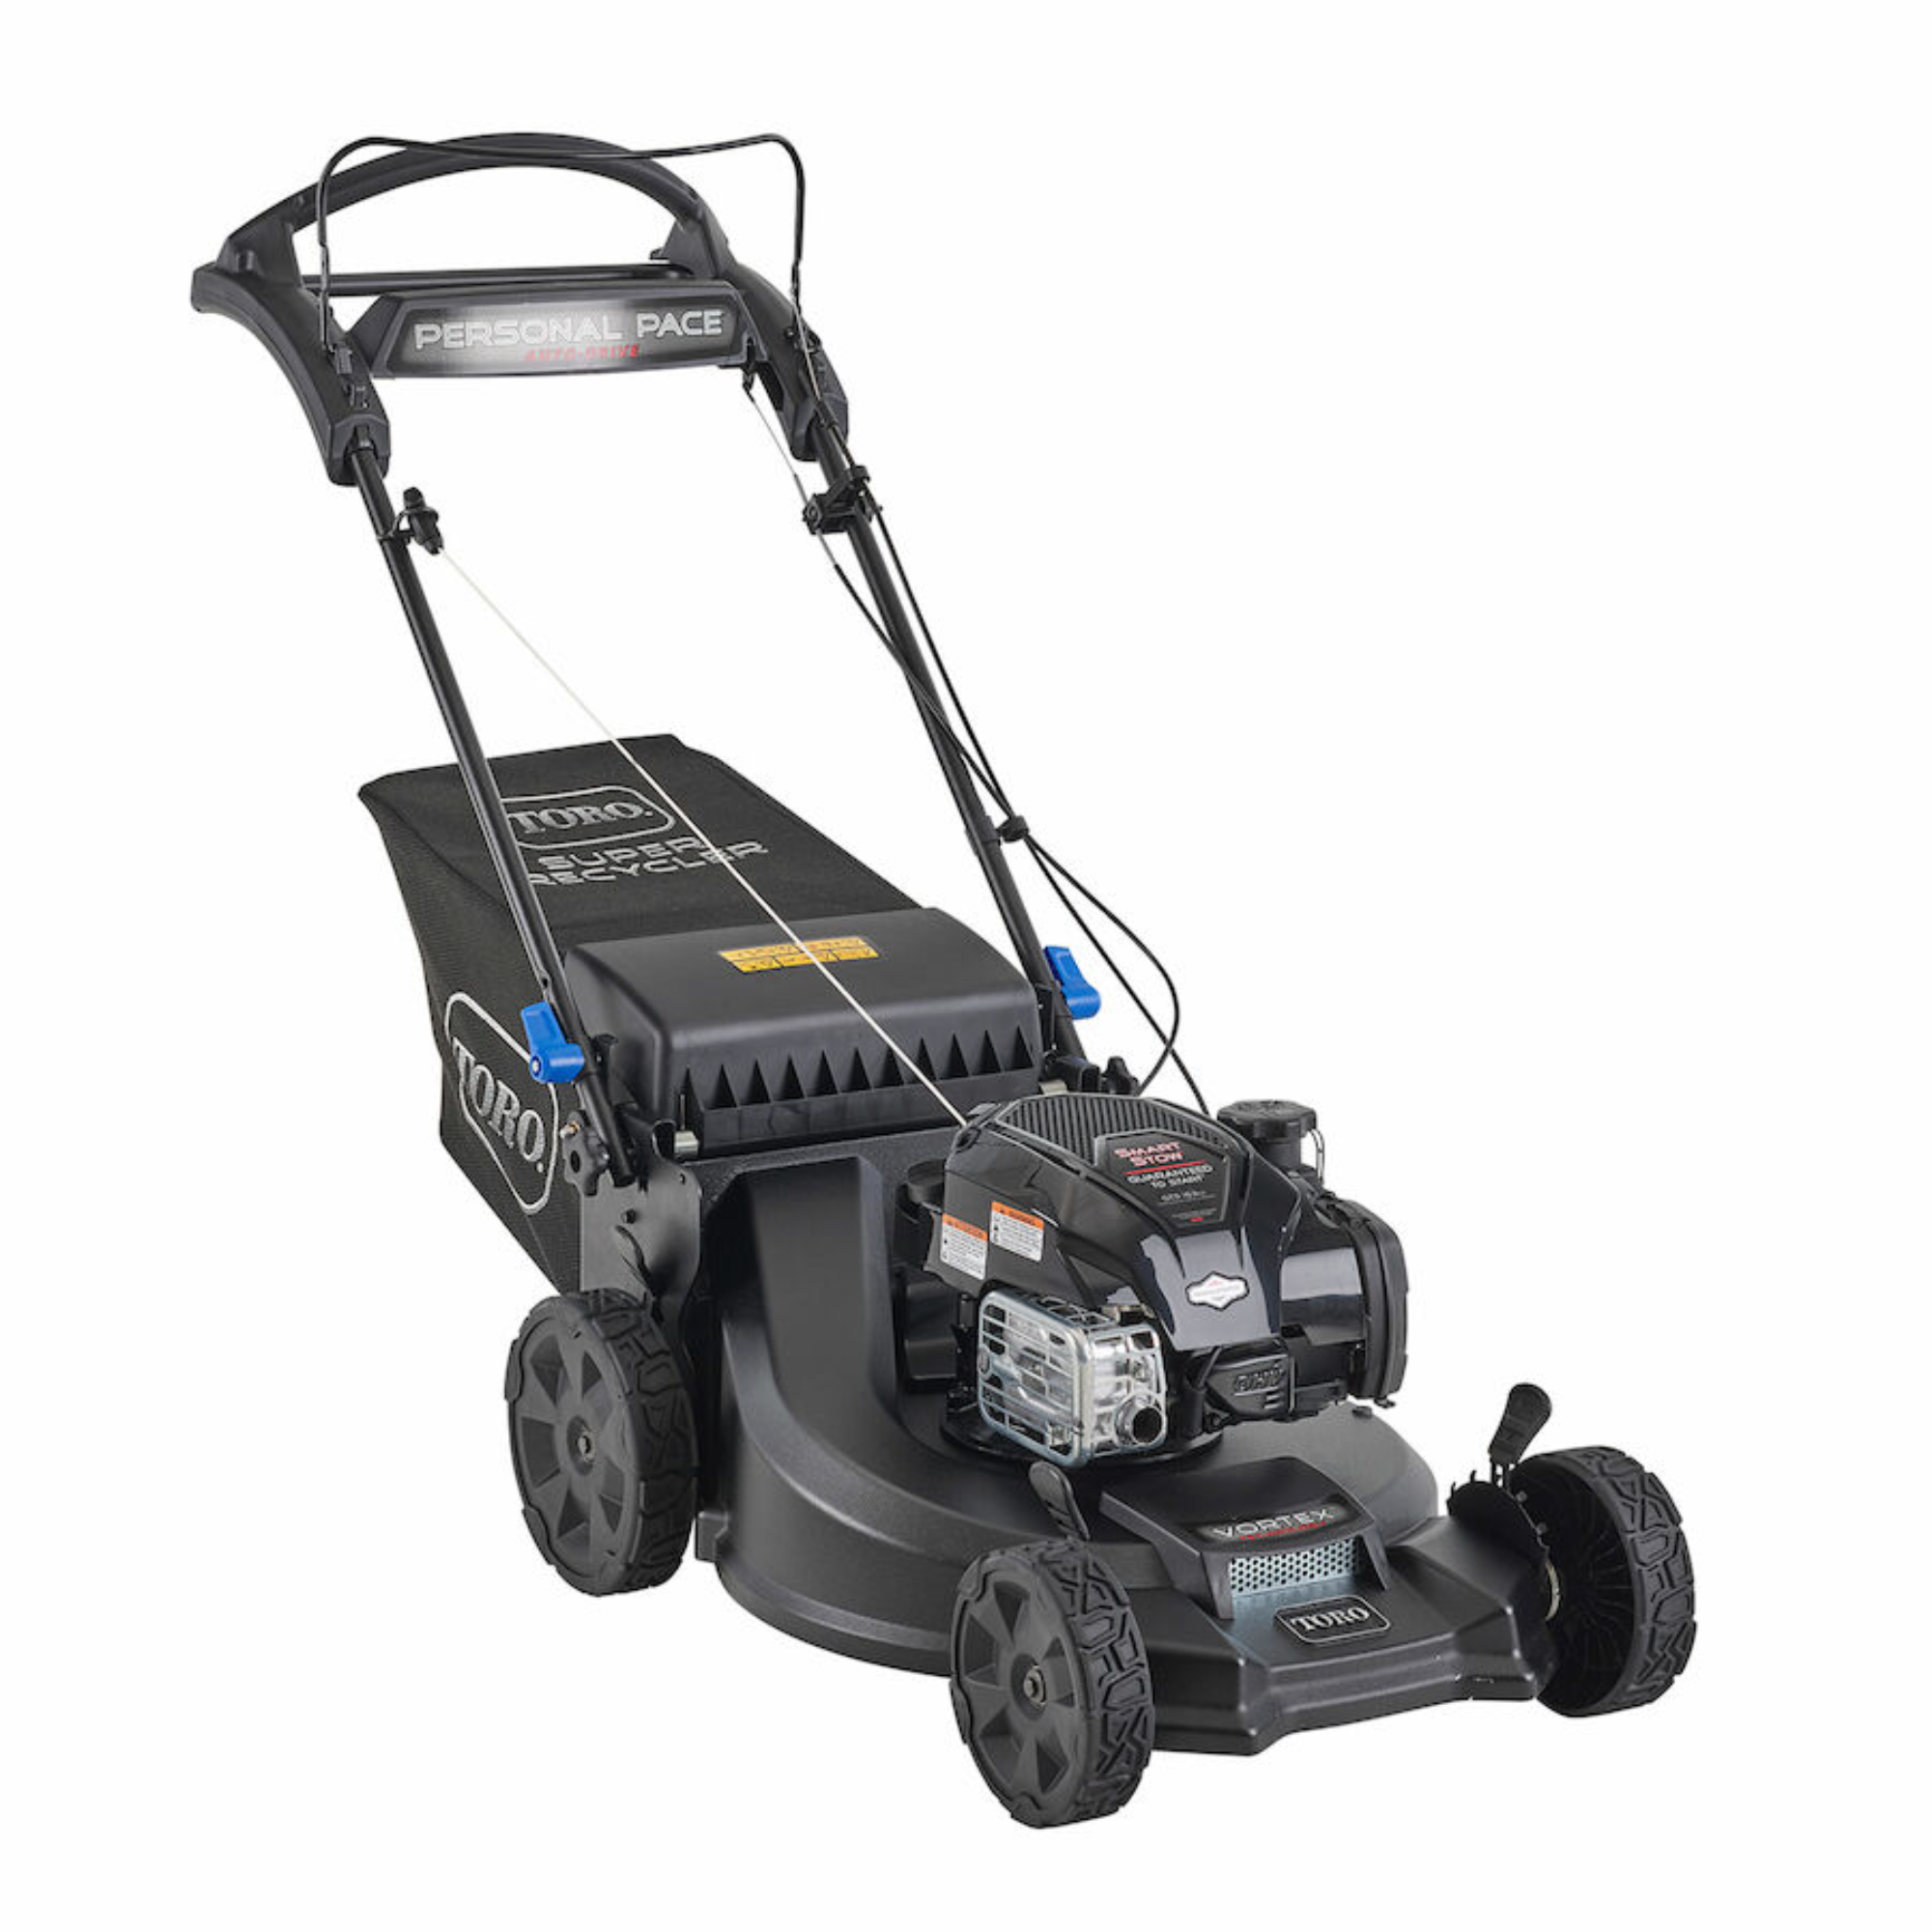 Toro 21 in. Super Recycler w/Spin-Stop & Personal Pace Gas Lawn Mower | 21563